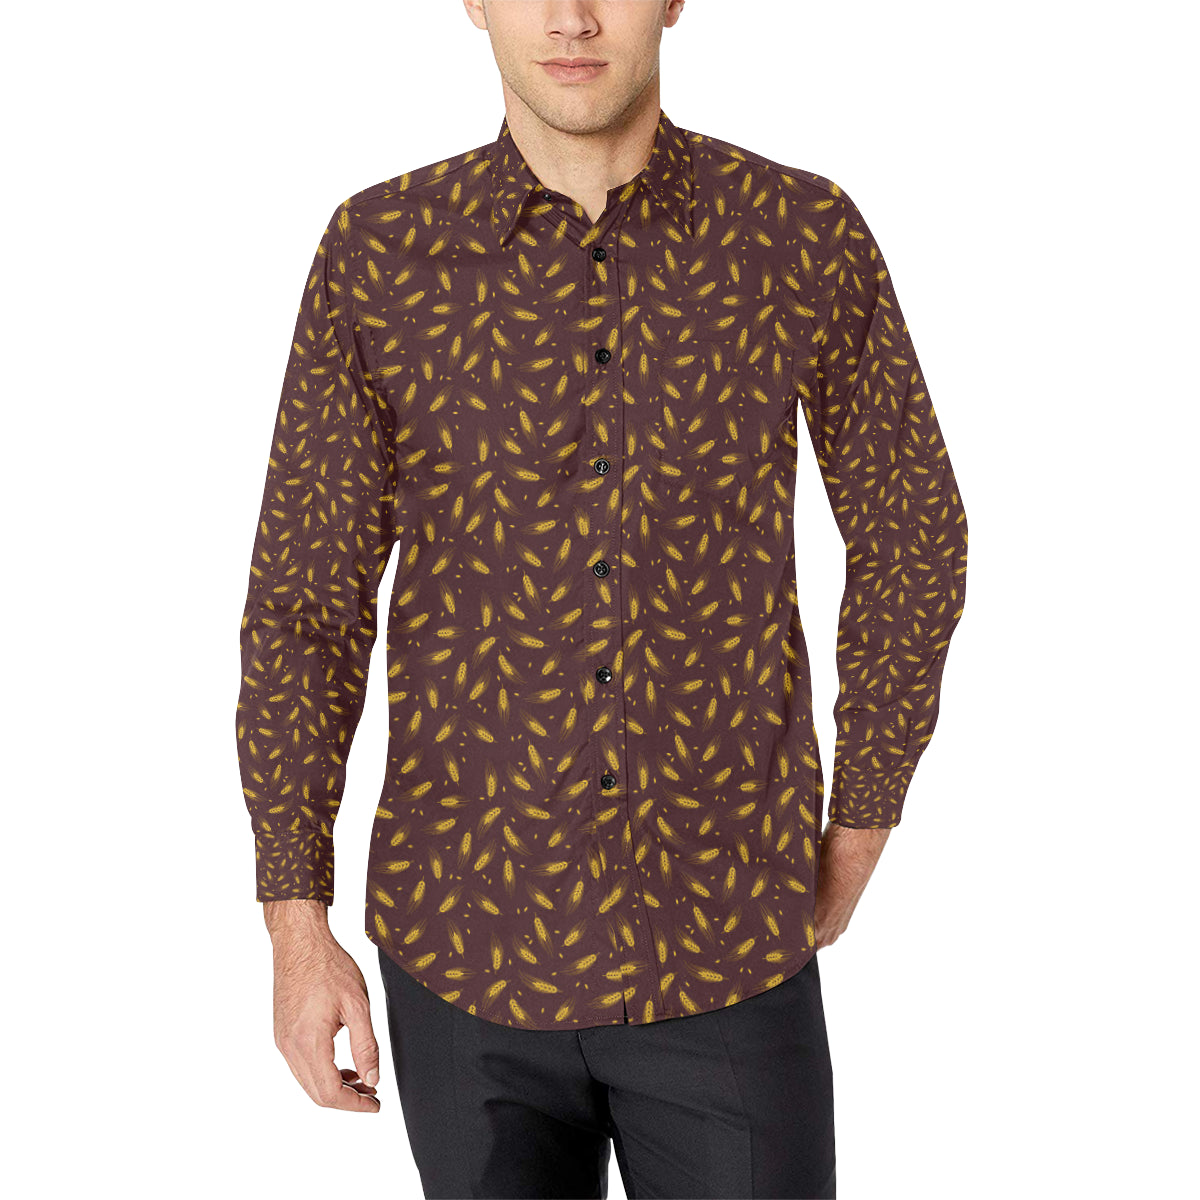 Agricultural Gold Wheat Print Pattern Men's Long Sleeve Shirt